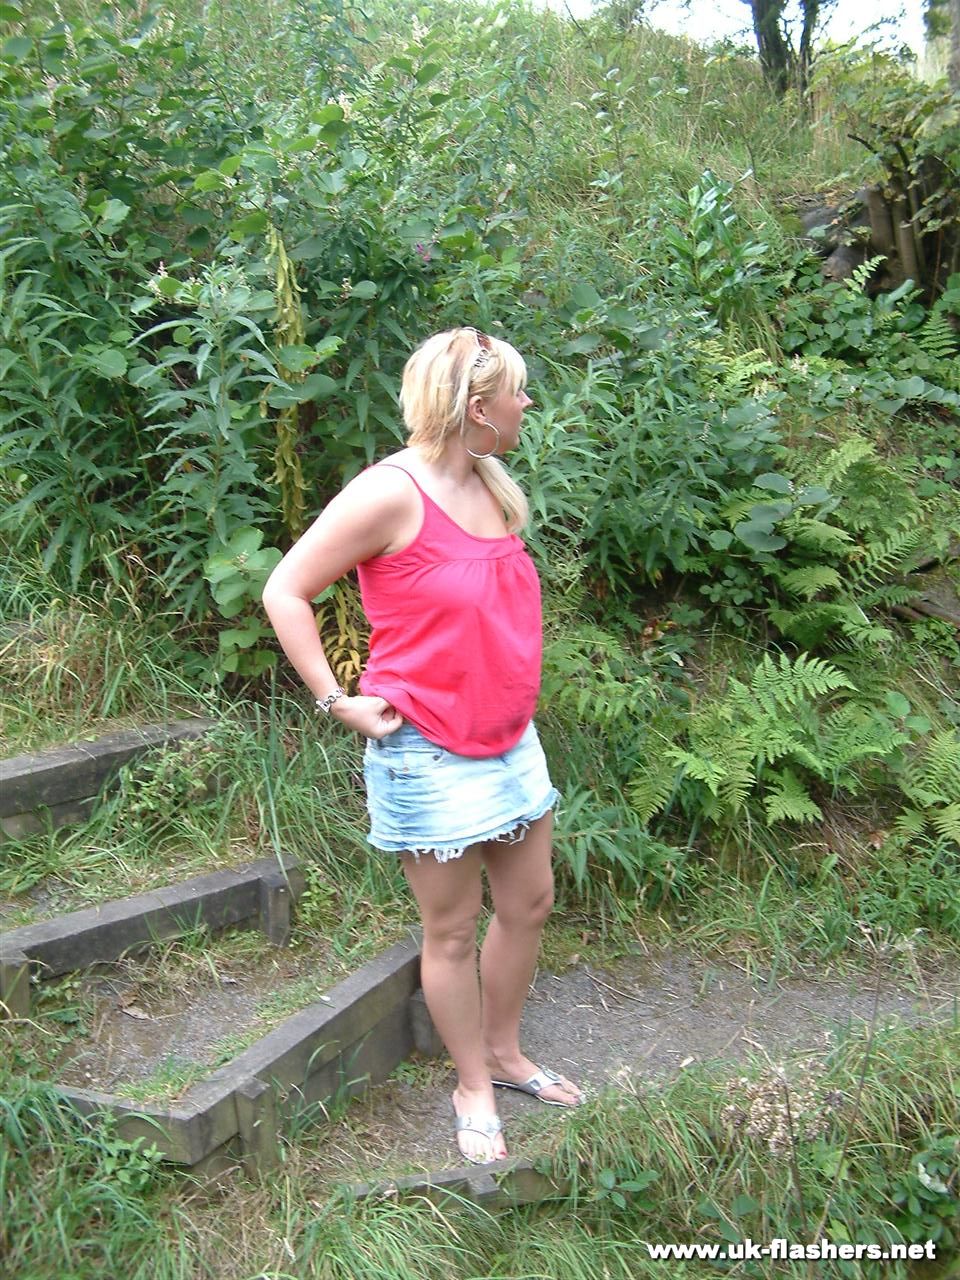 Overweight UK female with blonde hair strips naked on a popular walking trails 포르노 사진 #428021522 | UK Flashers Pics, Lena Leigh, Public, 모바일 포르노